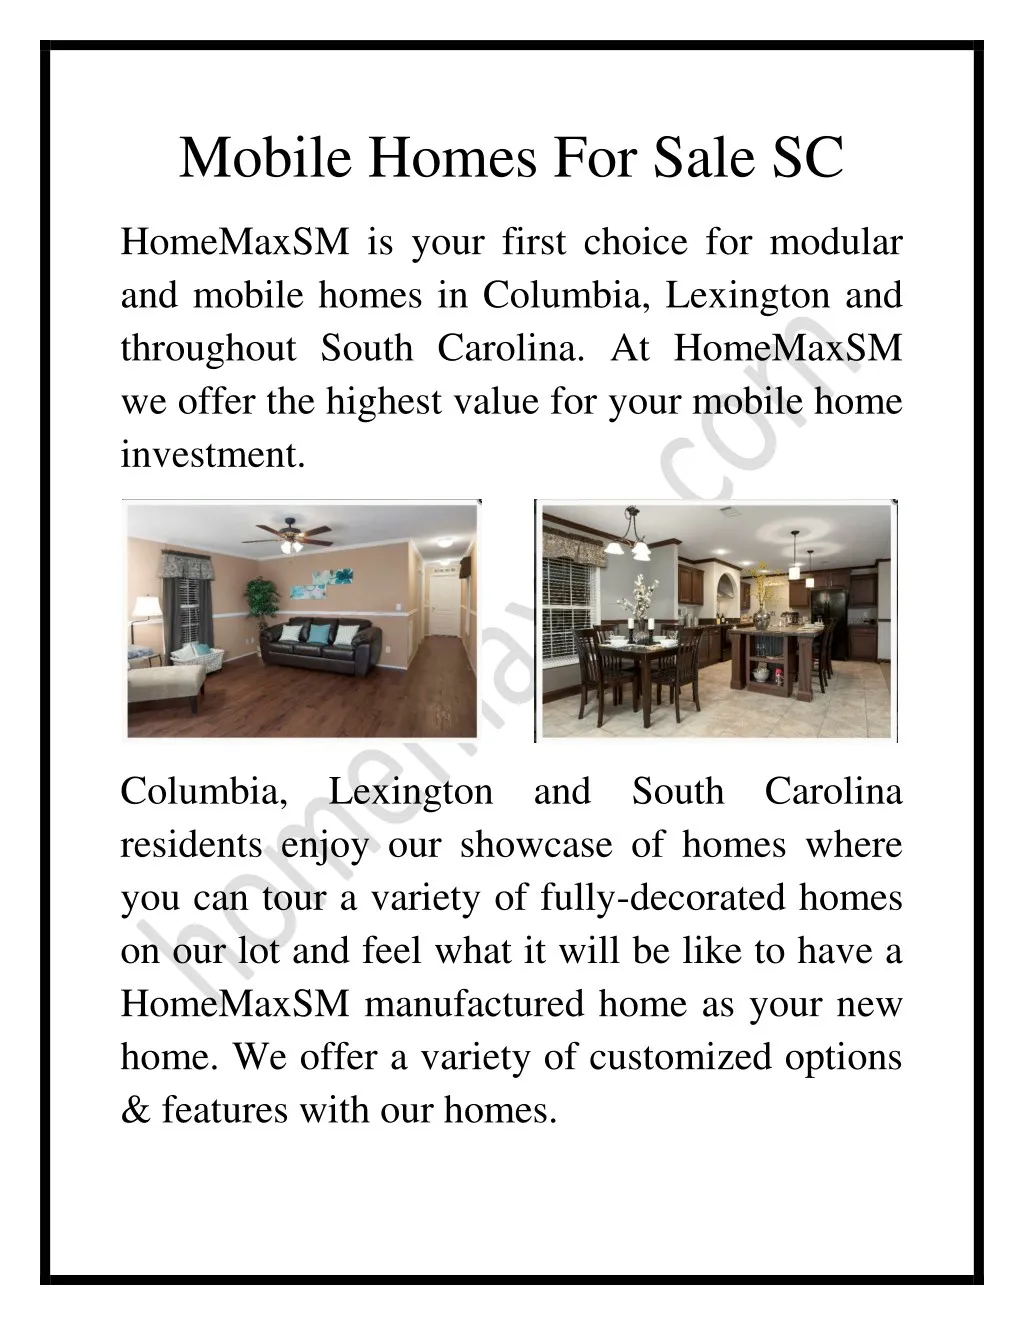 mobile homes for sale sc